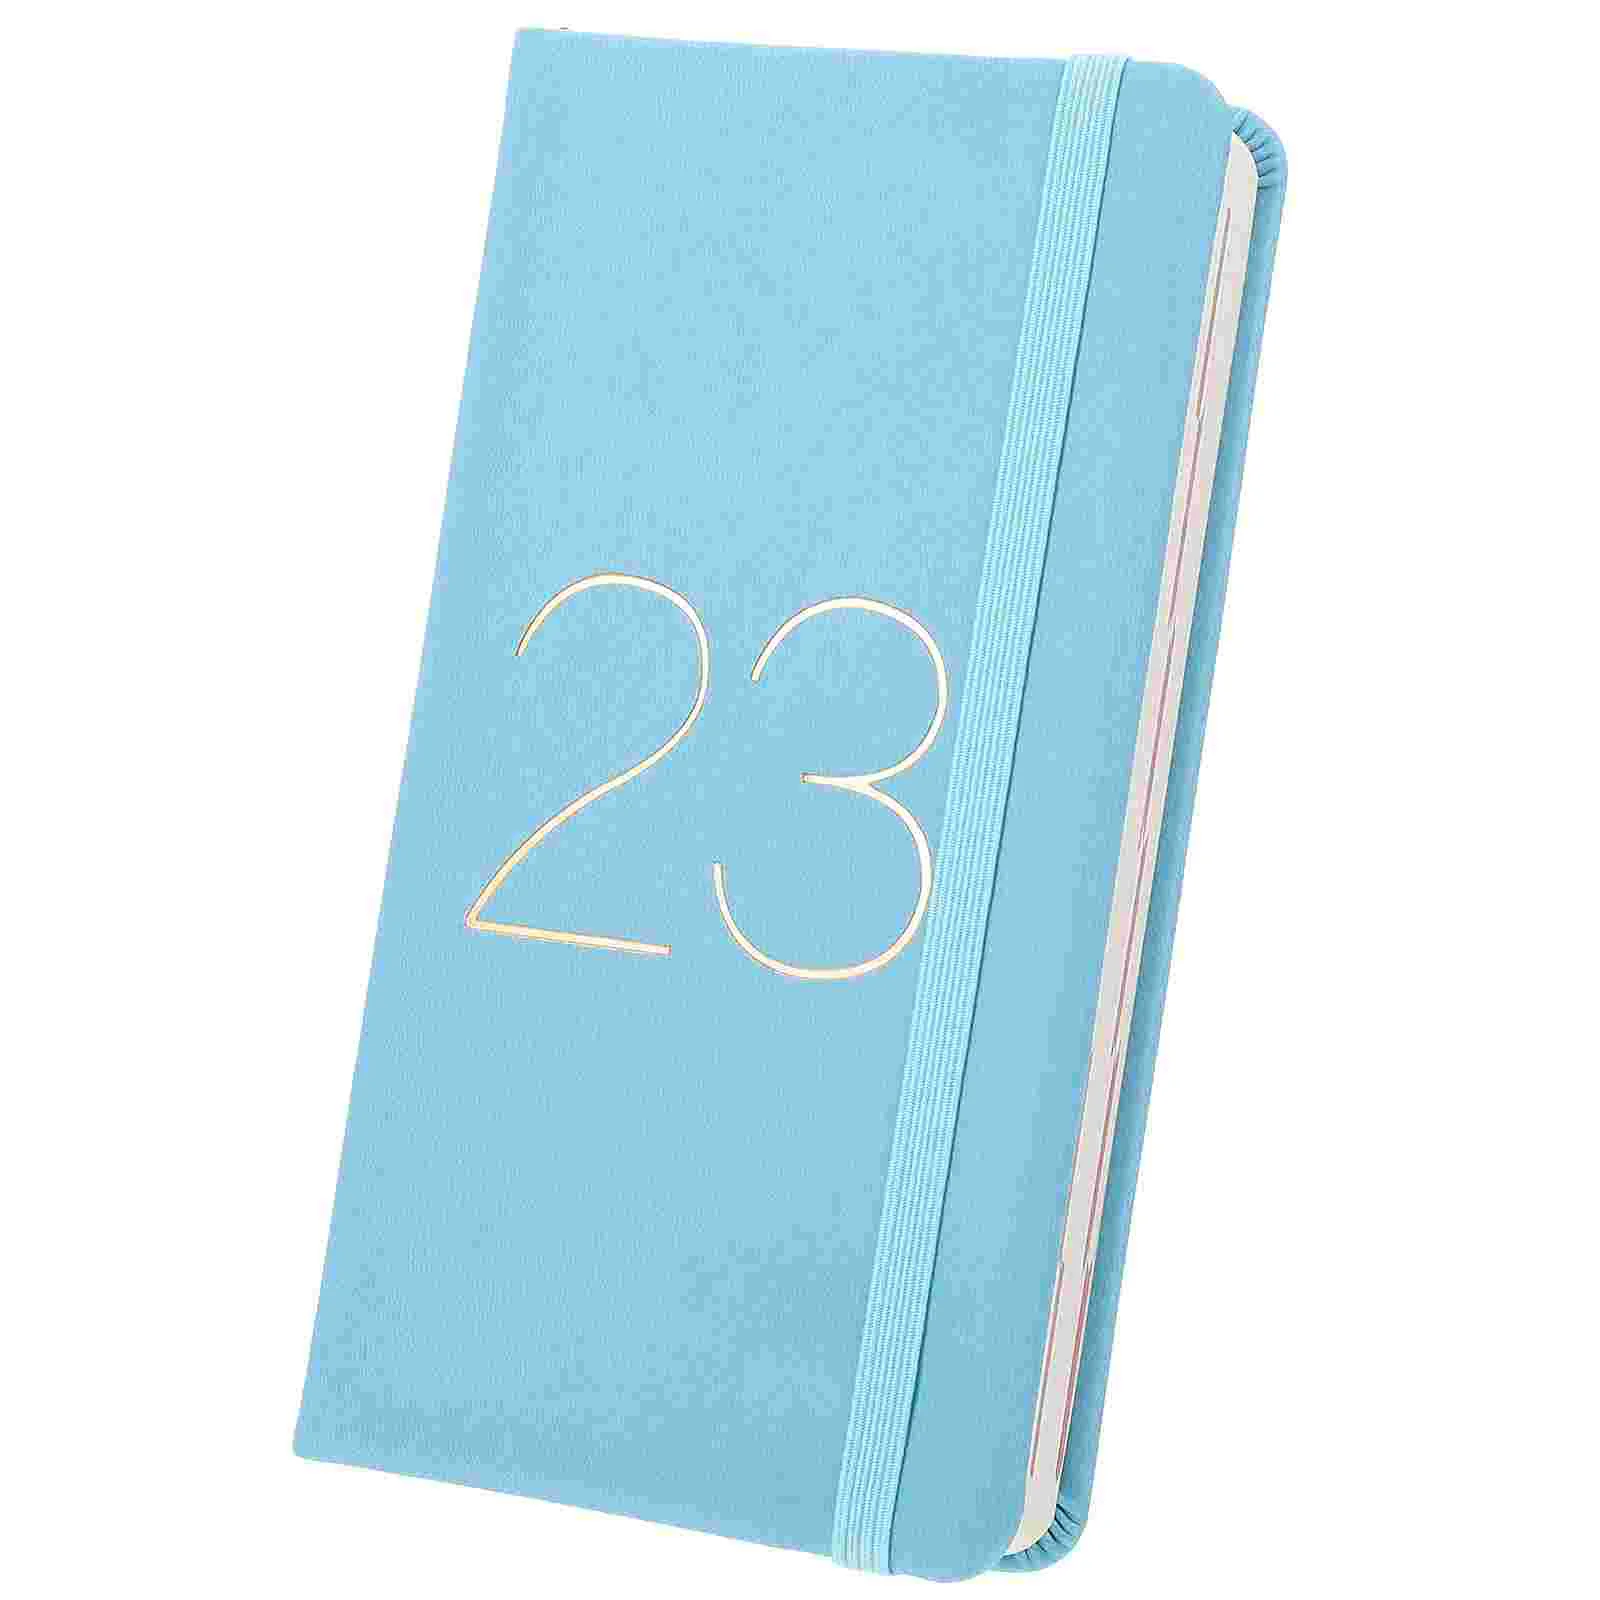 

Planner Notepad Notebook Daily Agenda Schedule Book Notepads 2023 Monthly Year Planning Appointment Day Weekly Dolist Management